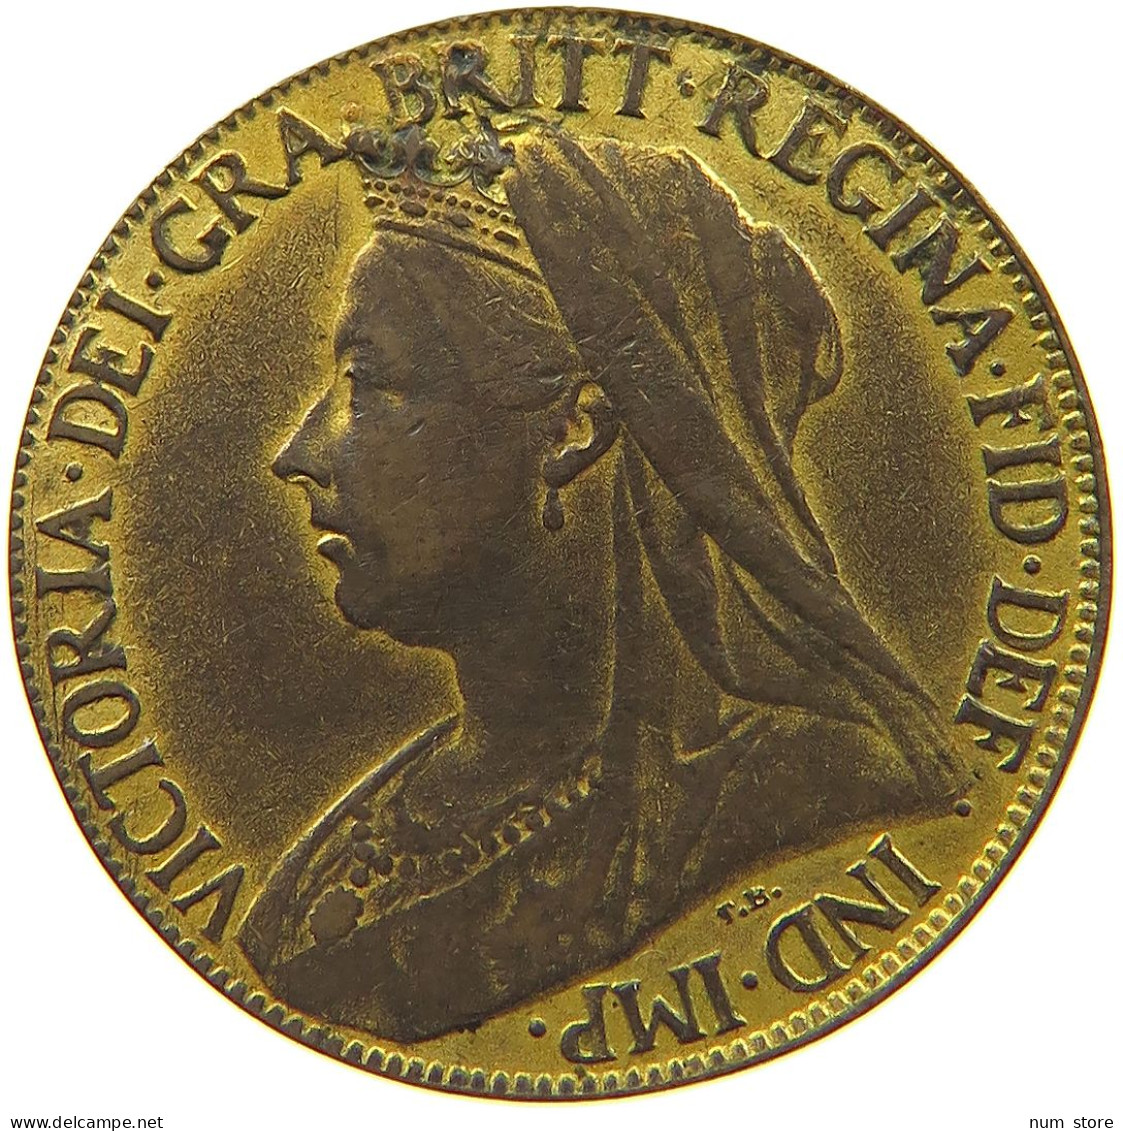 GREAT BRITAIN FARTHING 1901 Victoria 1837-1901 GOLD PLATED #c083 0391 - B. 1 Farthing